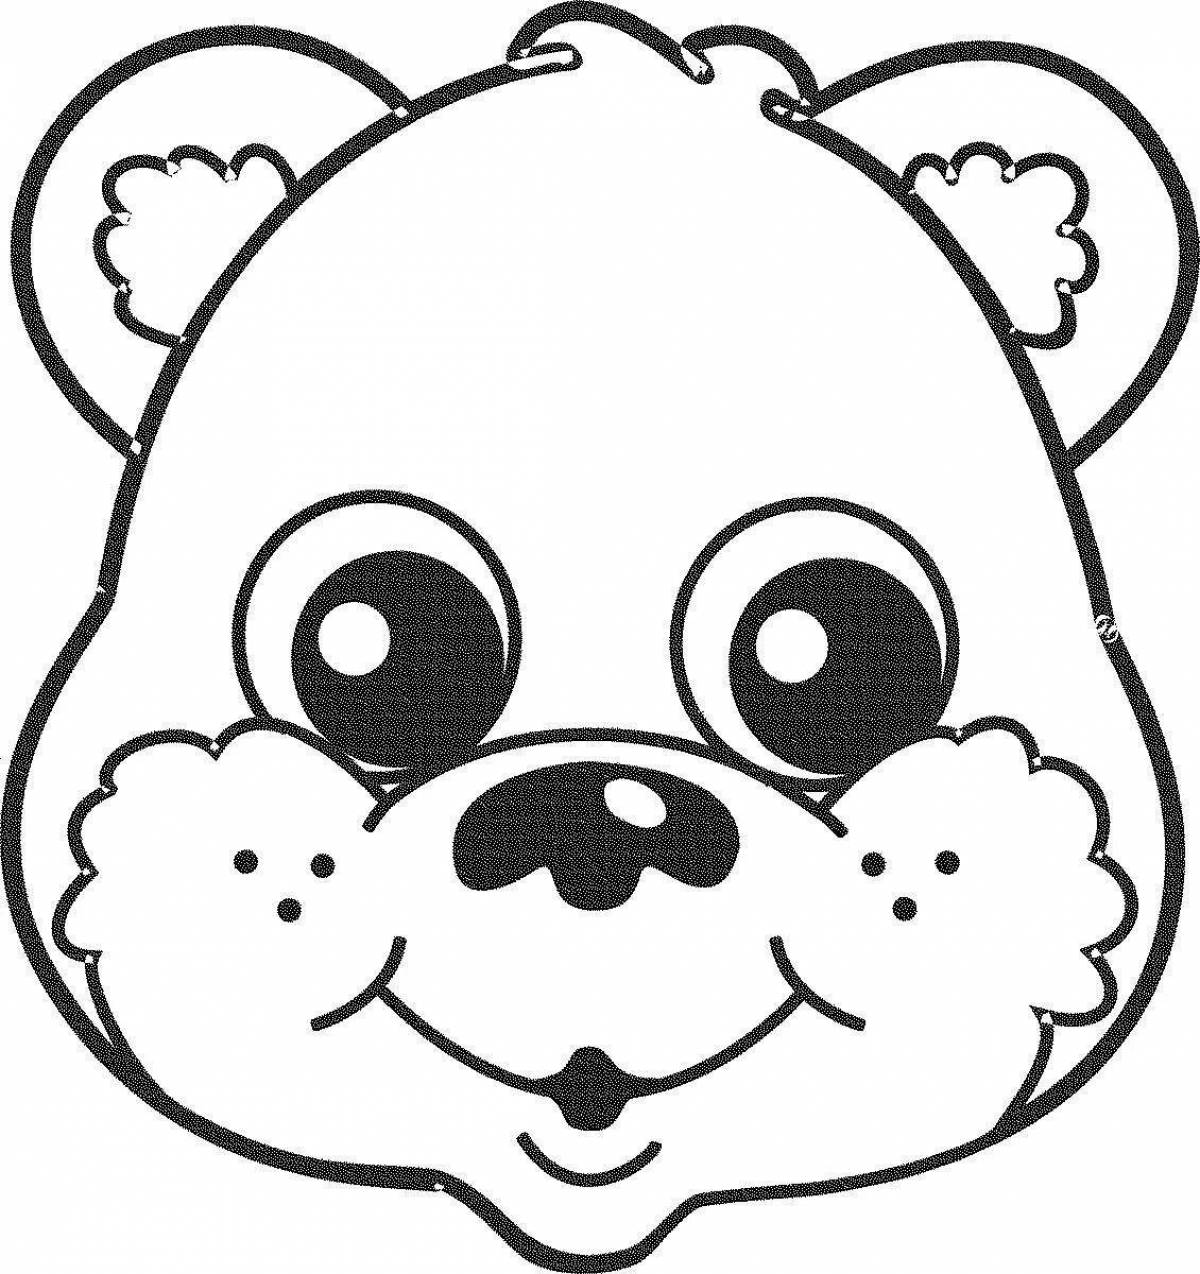 Grinning bear face coloring page